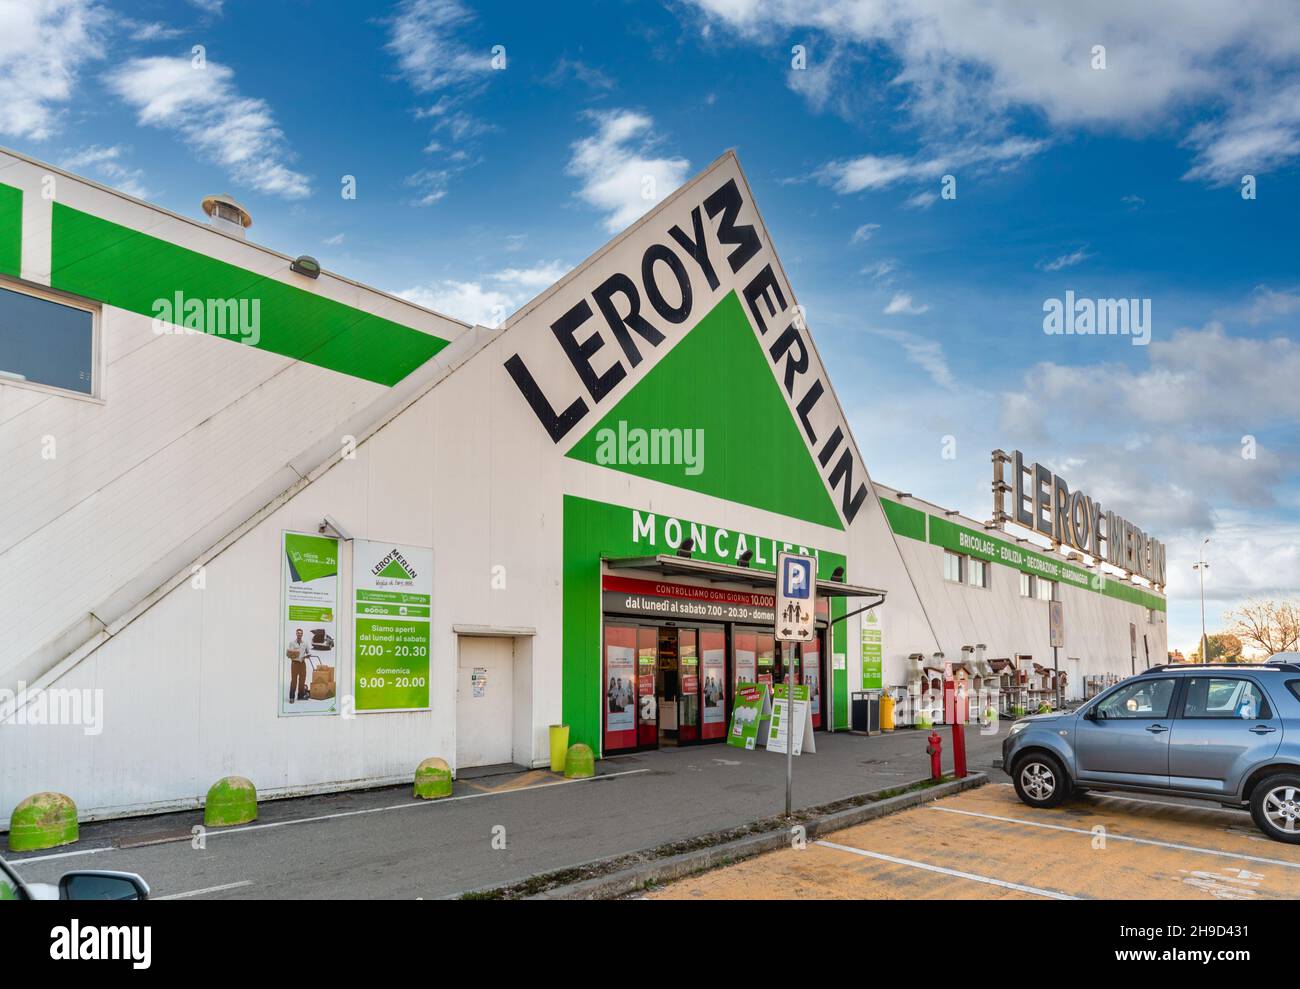 Moncalieri, Torino, Italy - December 6, 2021: Leroy Merlin store entrance with logo sign, it is a French company of large scale distribution in DIY, b Stock Photo